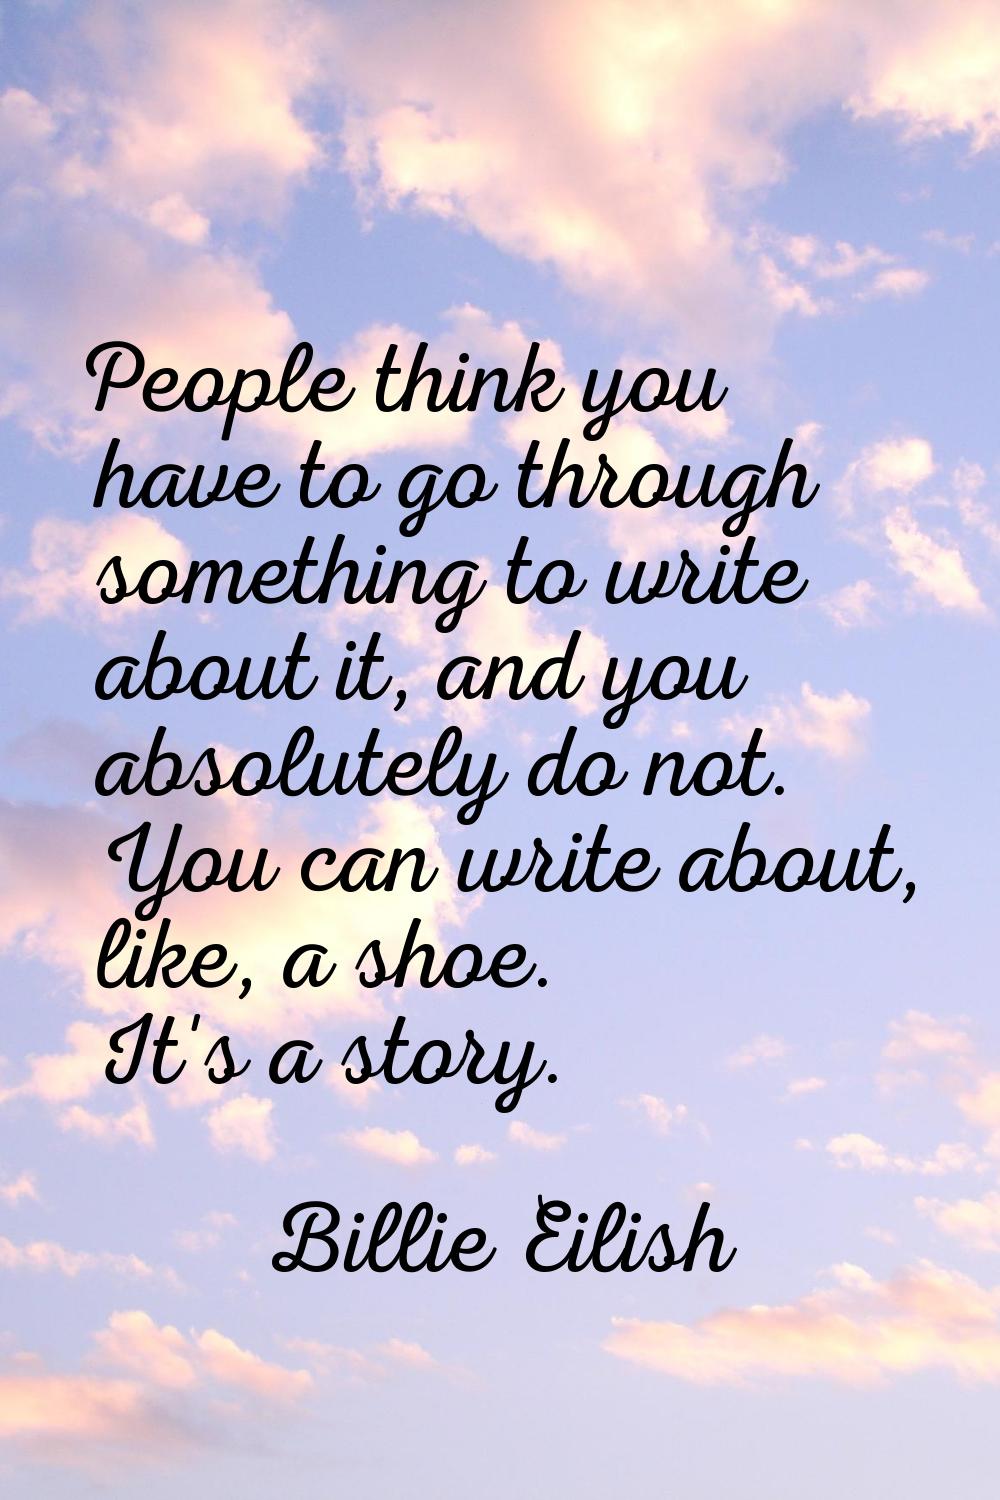 People think you have to go through something to write about it, and you absolutely do not. You can